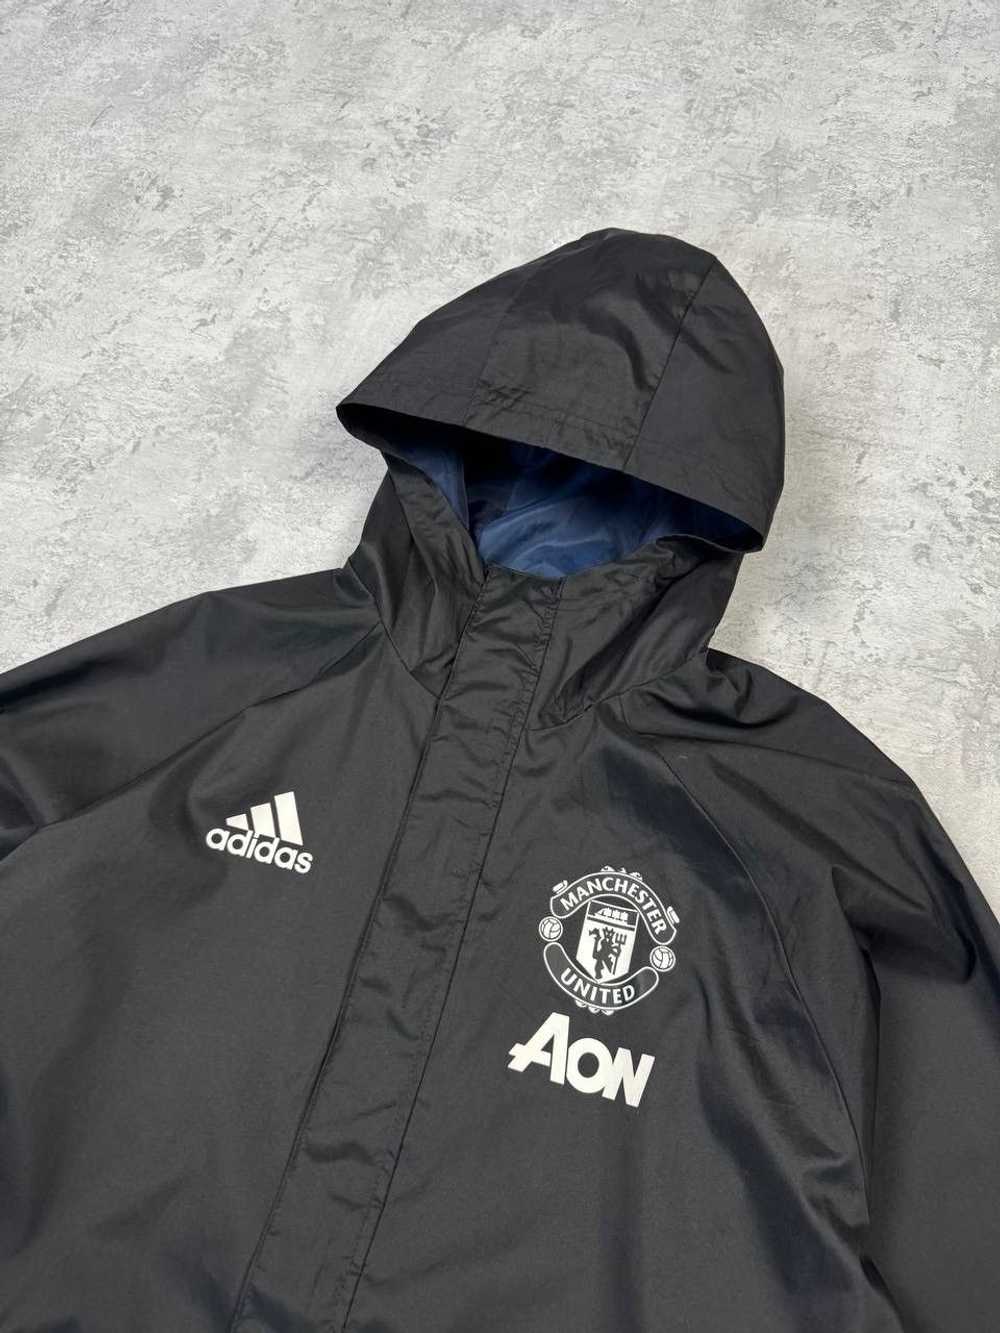 Adidas × Manchester United × Soccer Jersey Vintag… - image 4